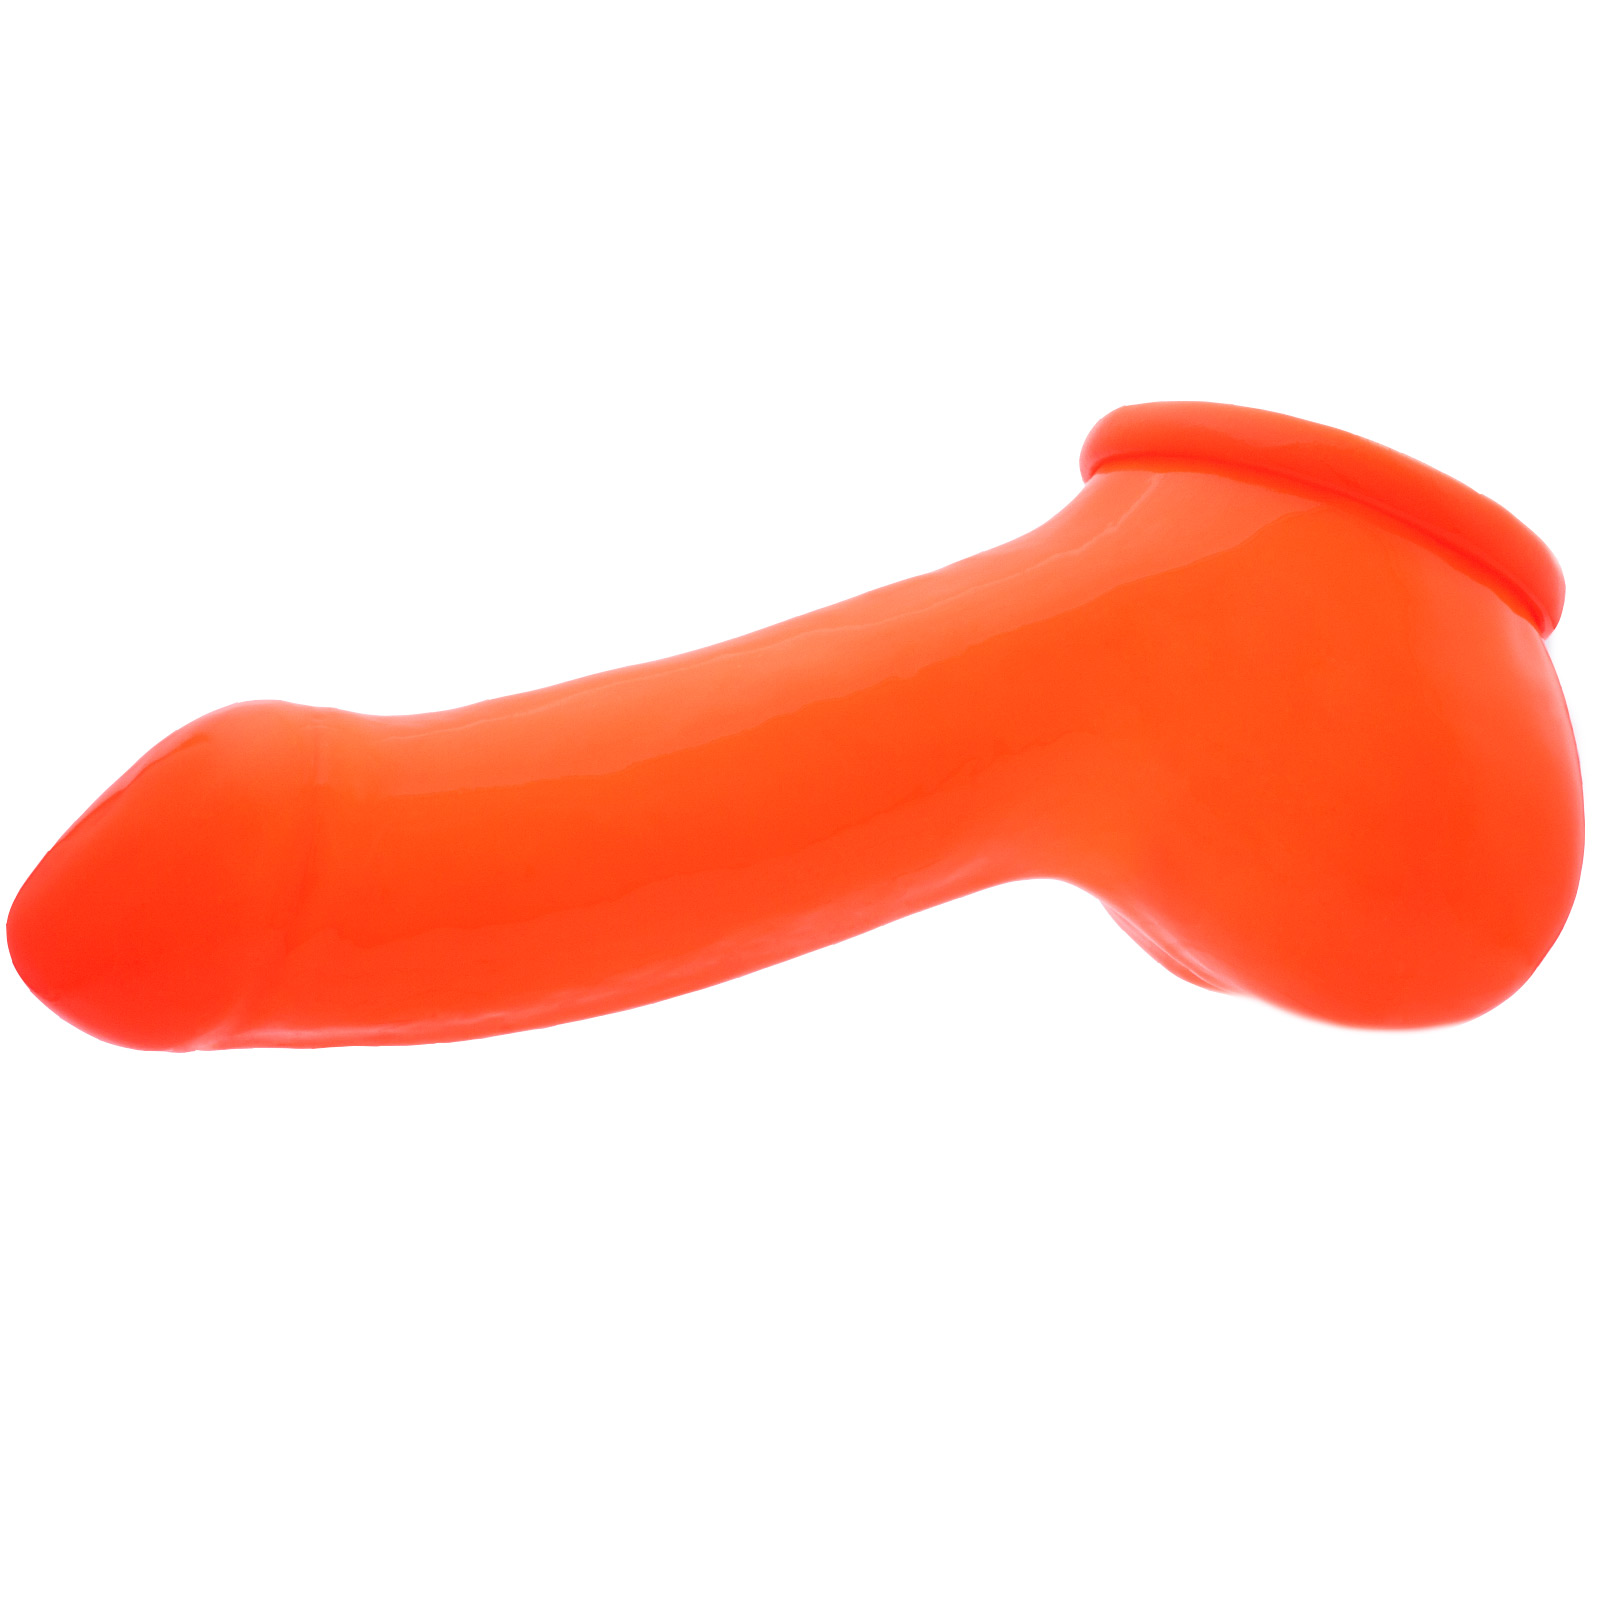 Toylie Latex Penis Sleeve «ADAM 4.5» neon orange (glow effect), with molded glans and scrotum